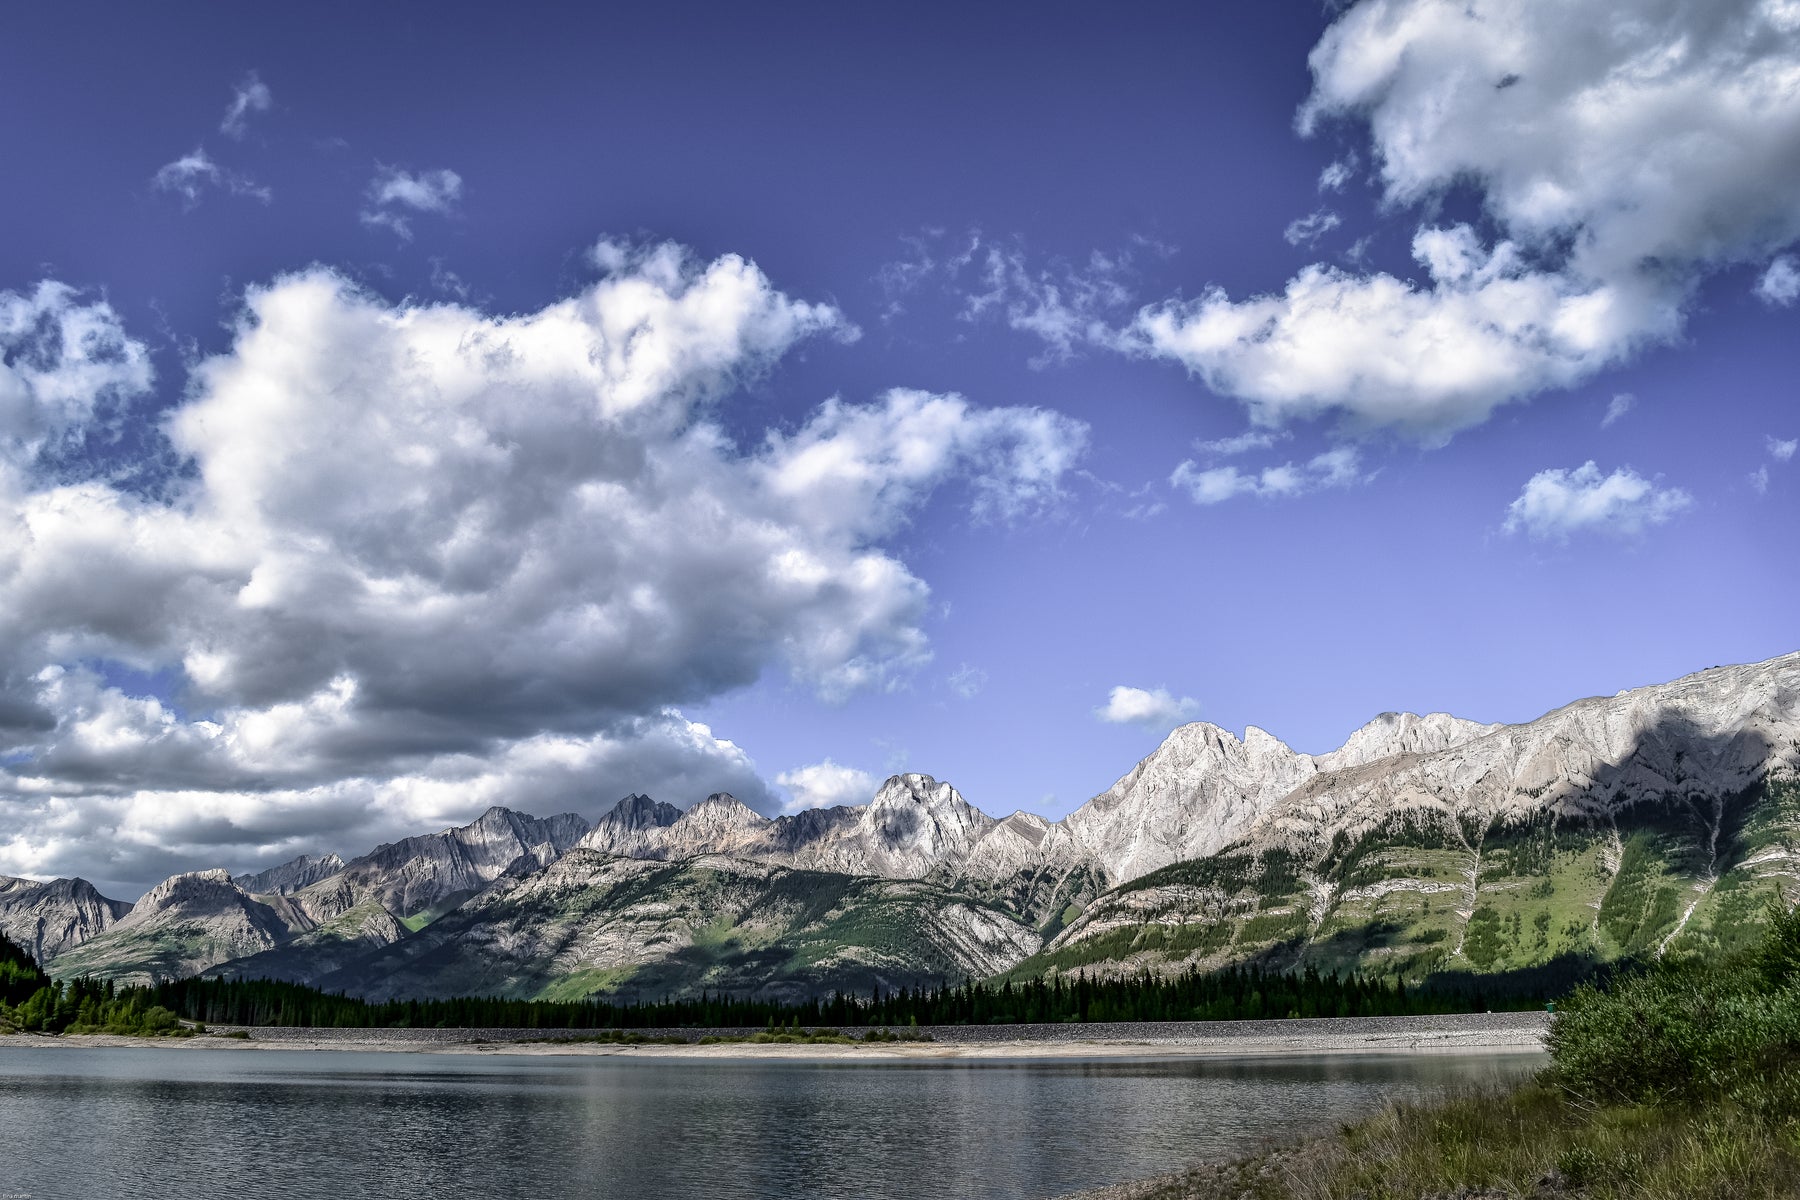 beautiful outdoor photo of mountains and a lake with a blue sky and clouds.